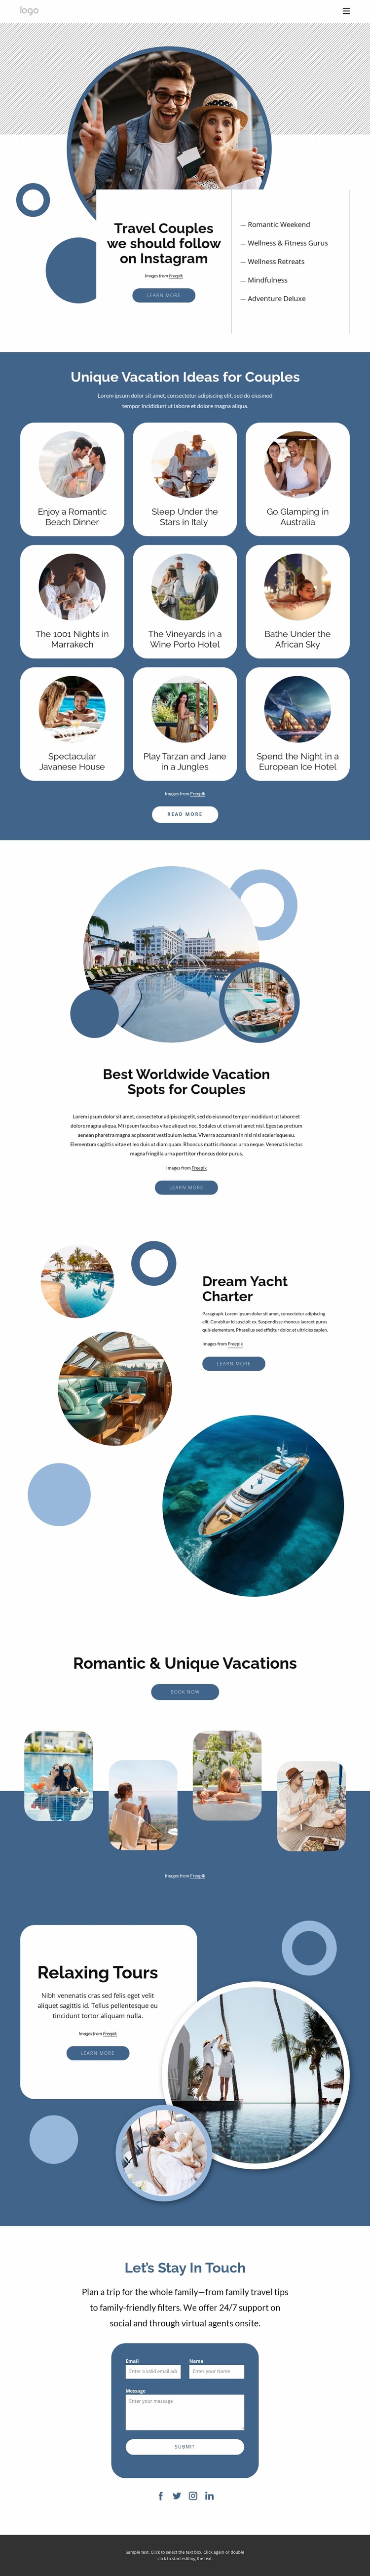 Imagine travelling to some of the most amazing places Landing Page